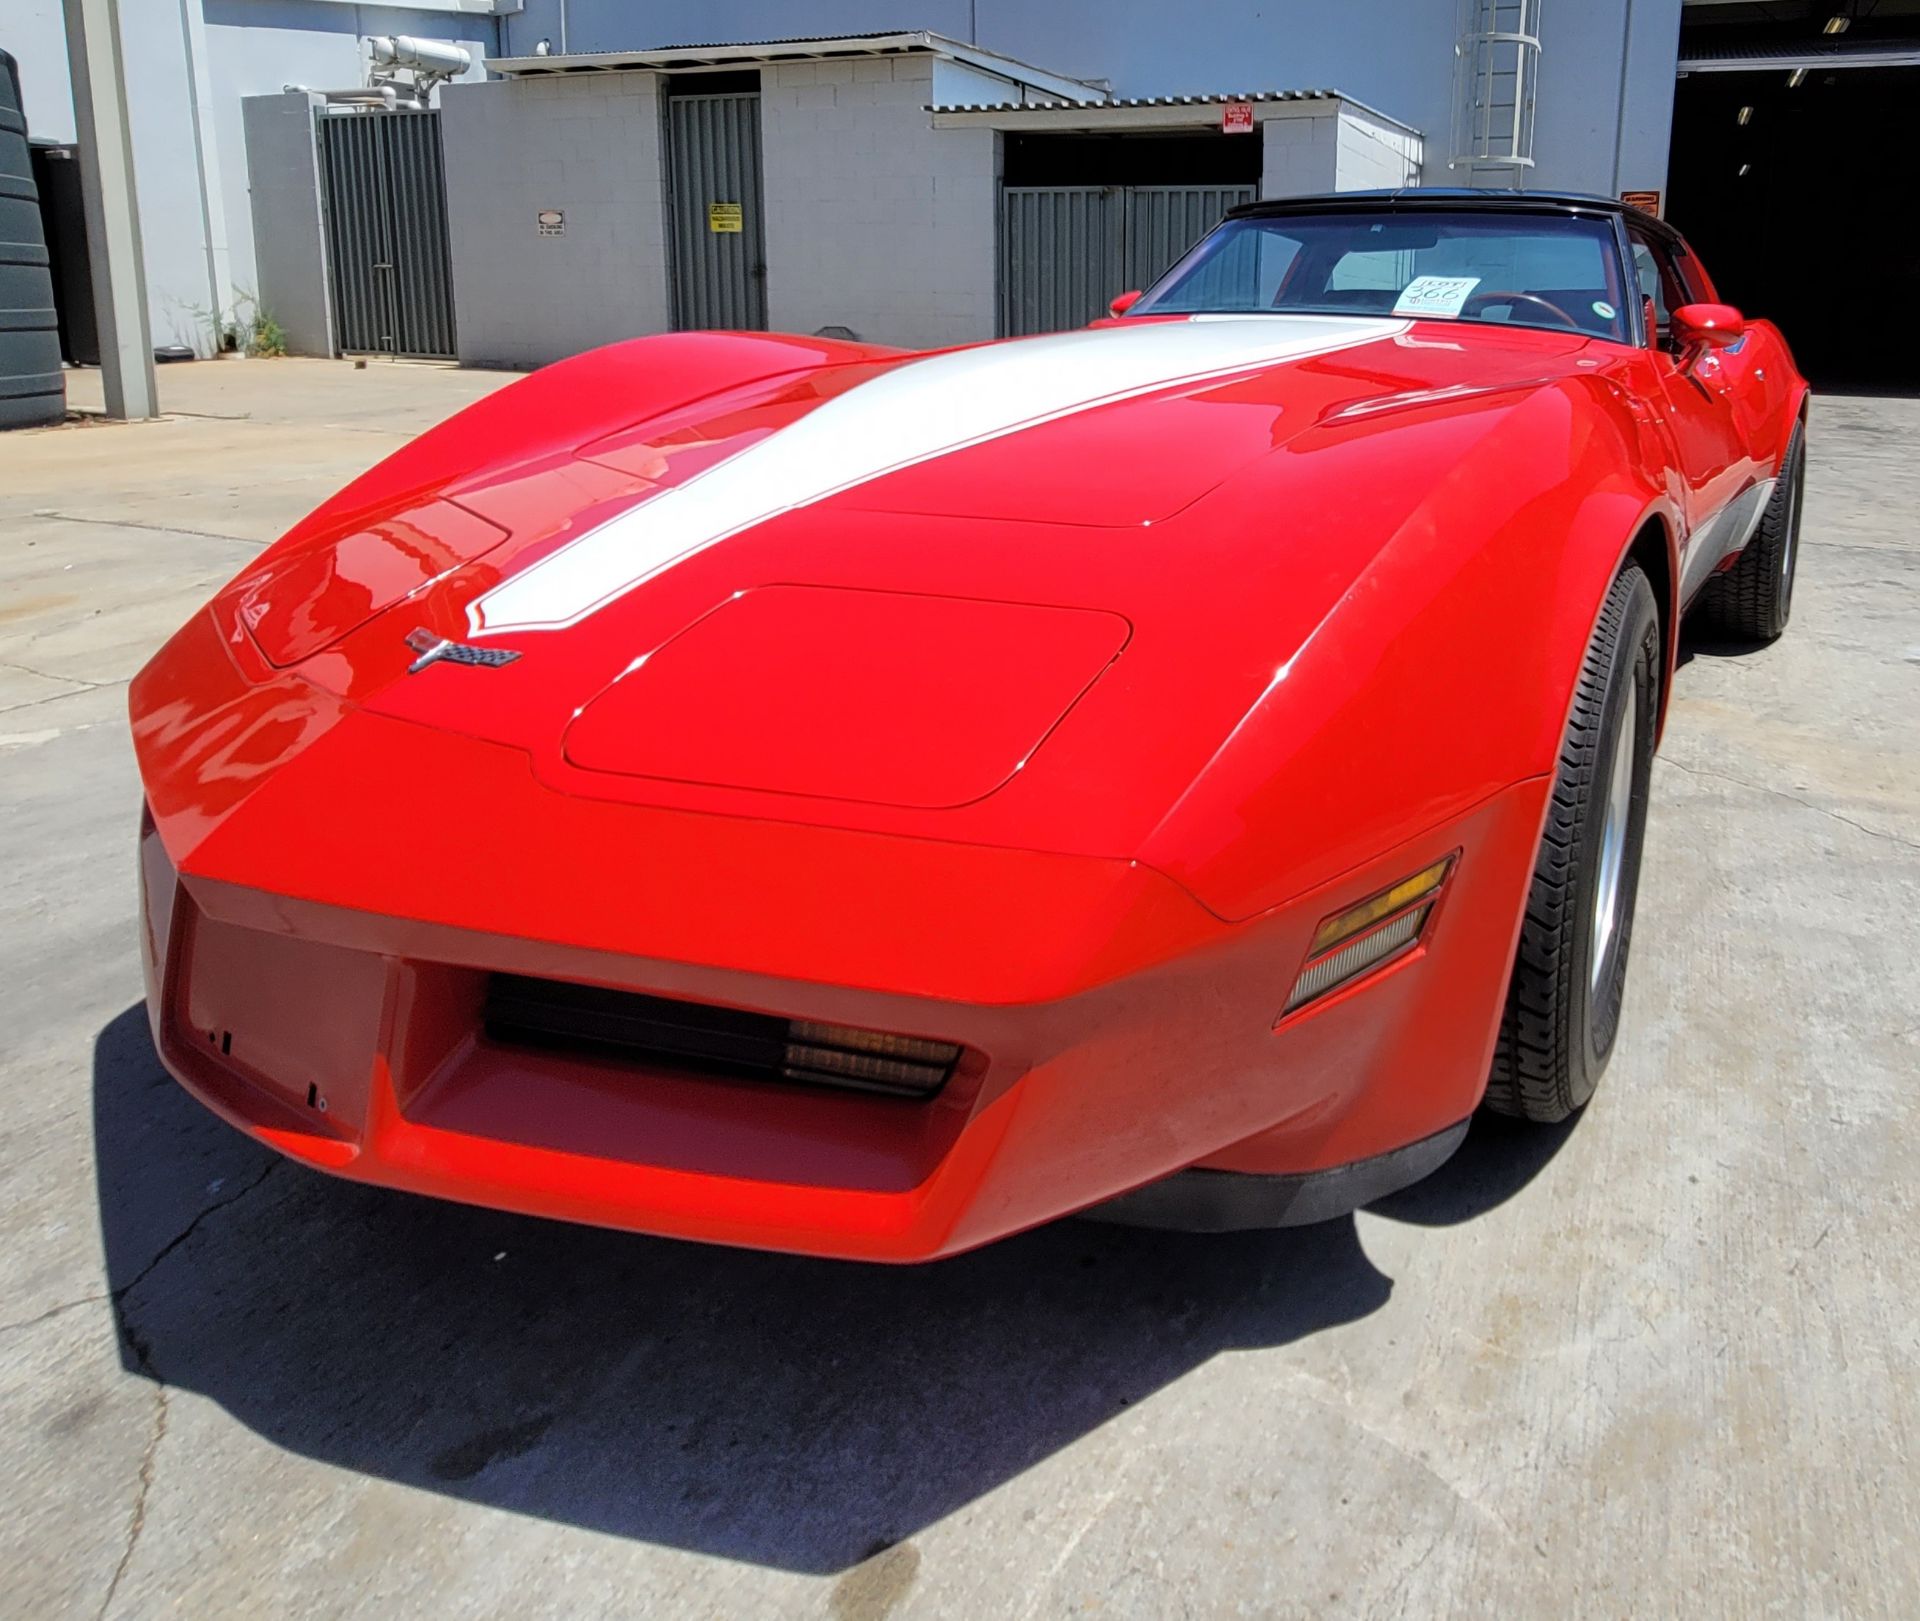 1980 CHEVROLET CORVETTE, WAS VIC EDELBROCK'S PERSONAL CAR BOUGHT FOR R&D, RED INTERIOR, TITLE ONLY. - Image 48 of 70